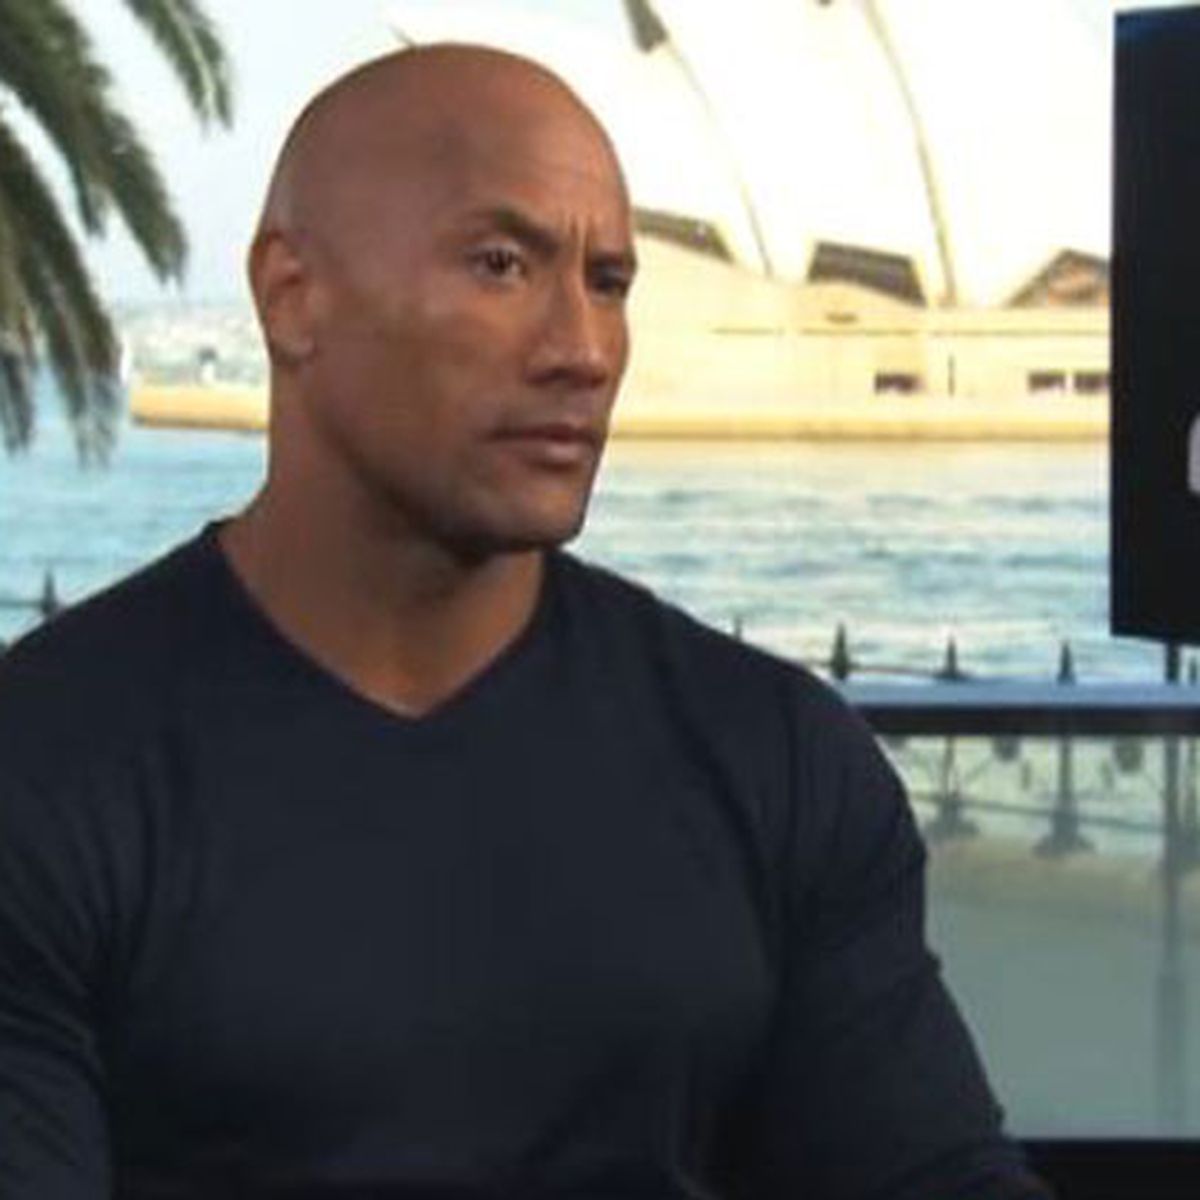 42 Times Dwayne The Rock Johnson Raises His Eyebrow In Movies